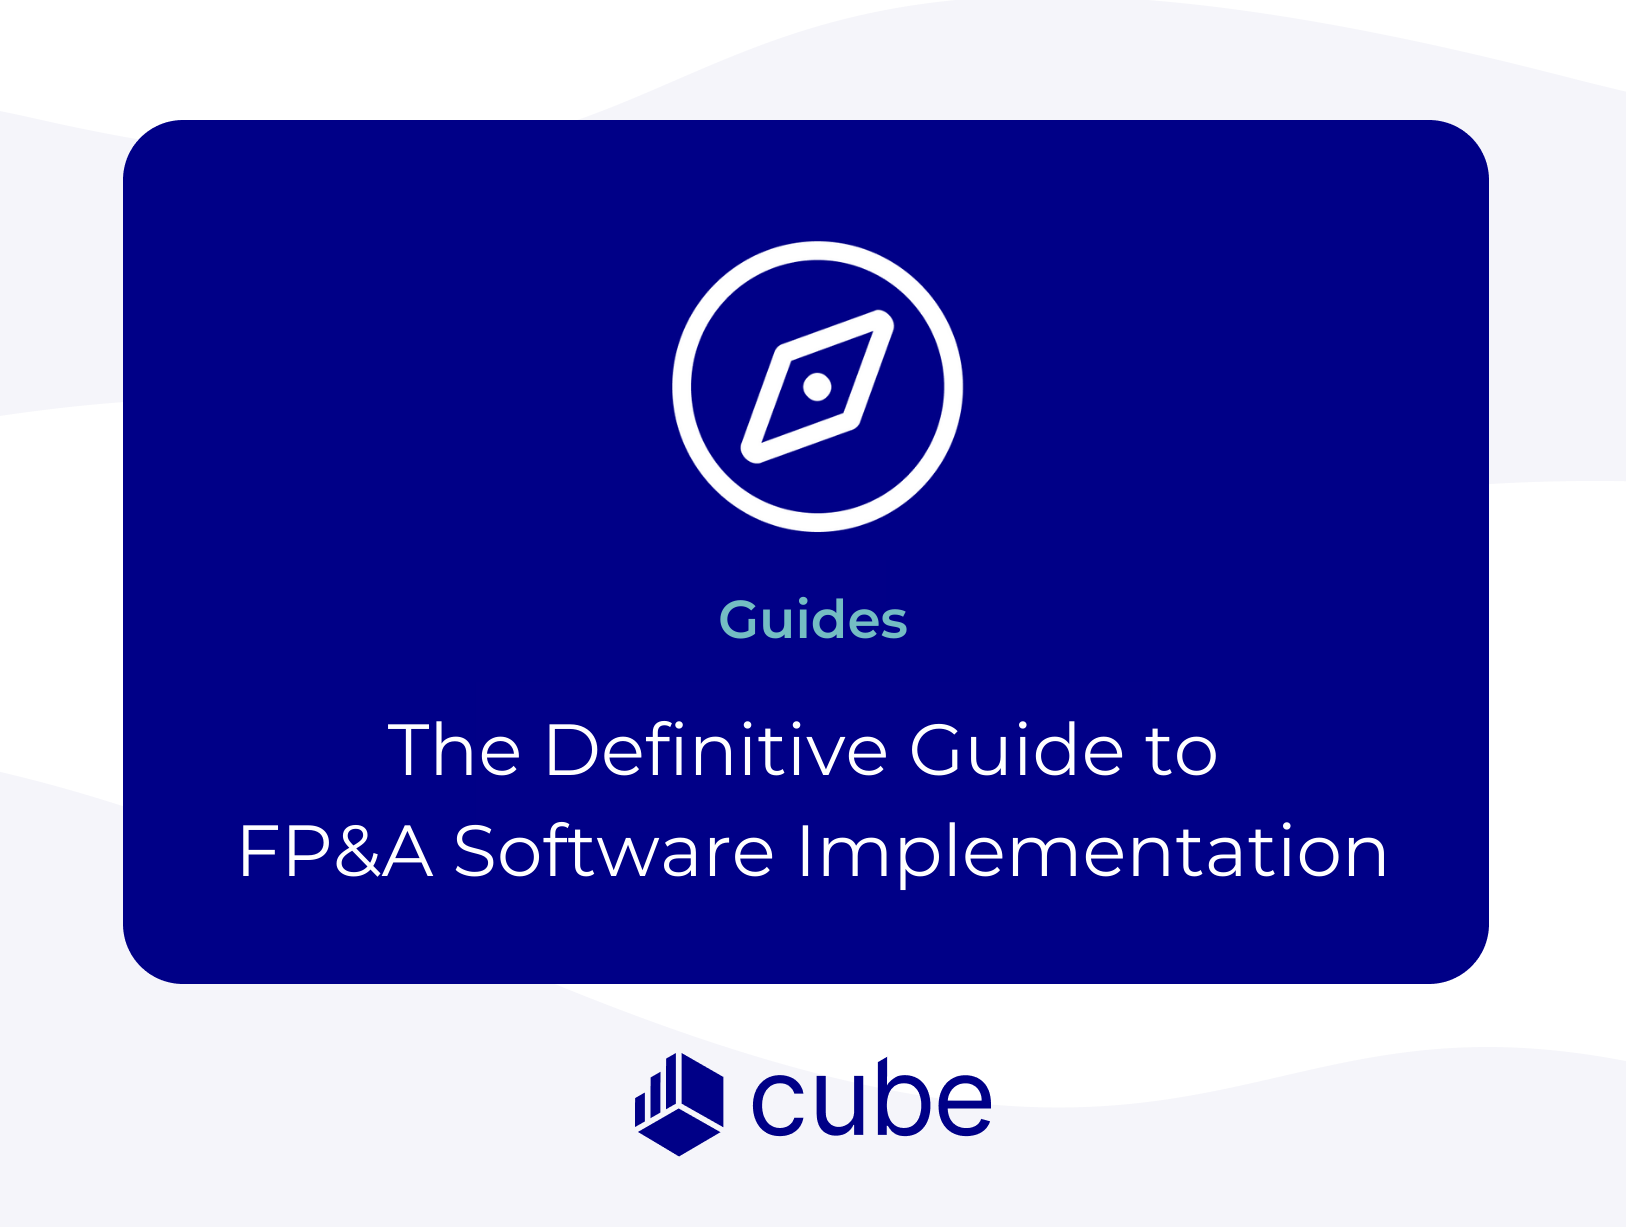 The Definitive Guide to FP&A Software Implementation in 2022